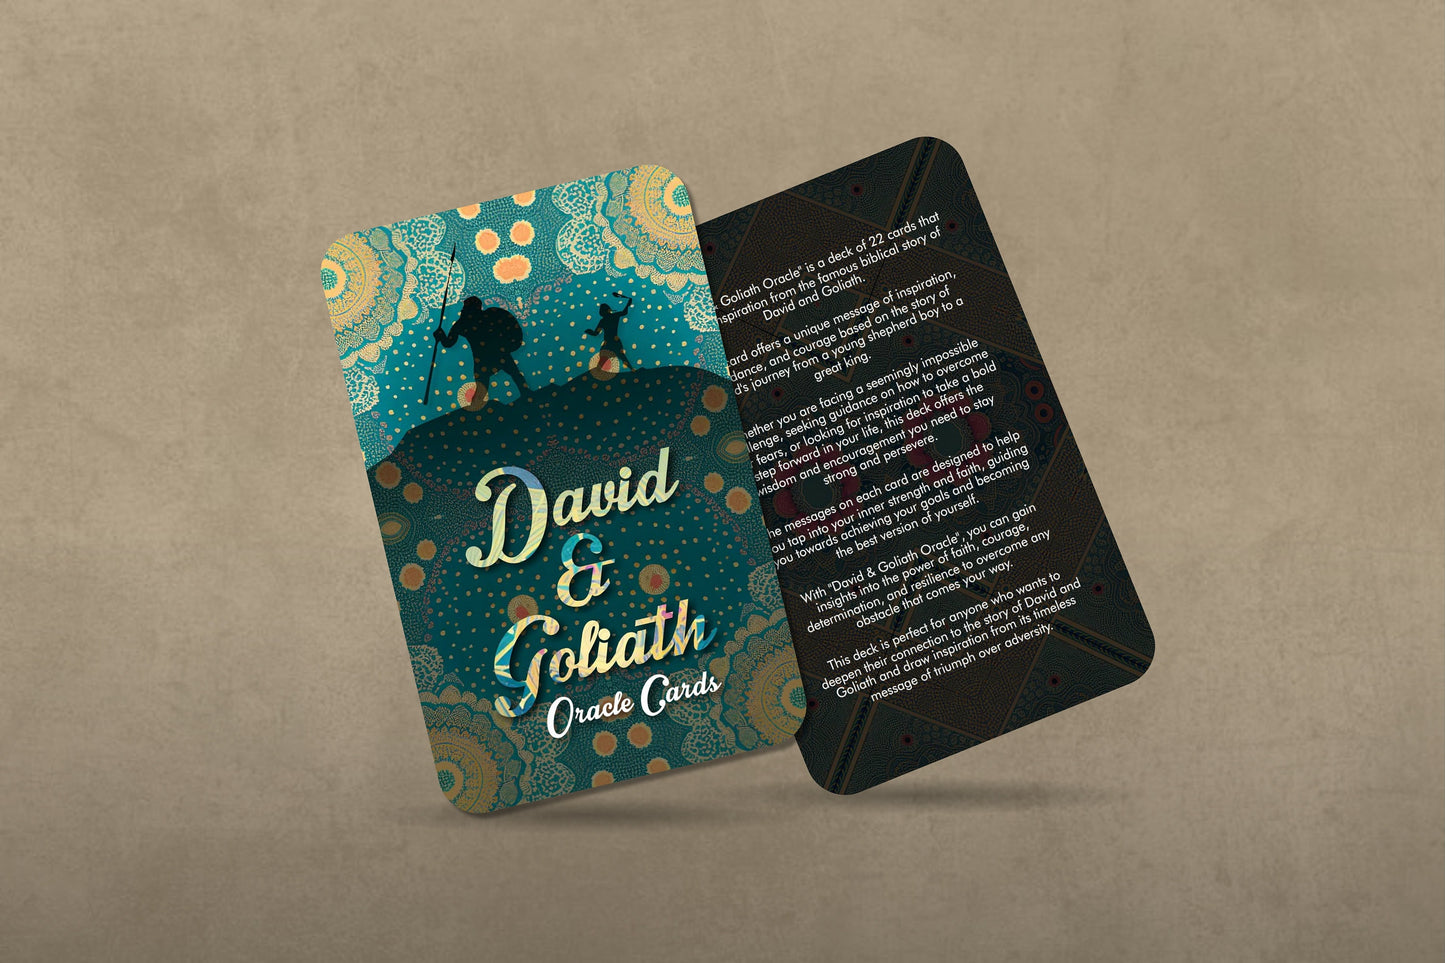 David and Goliath - Oracle cards